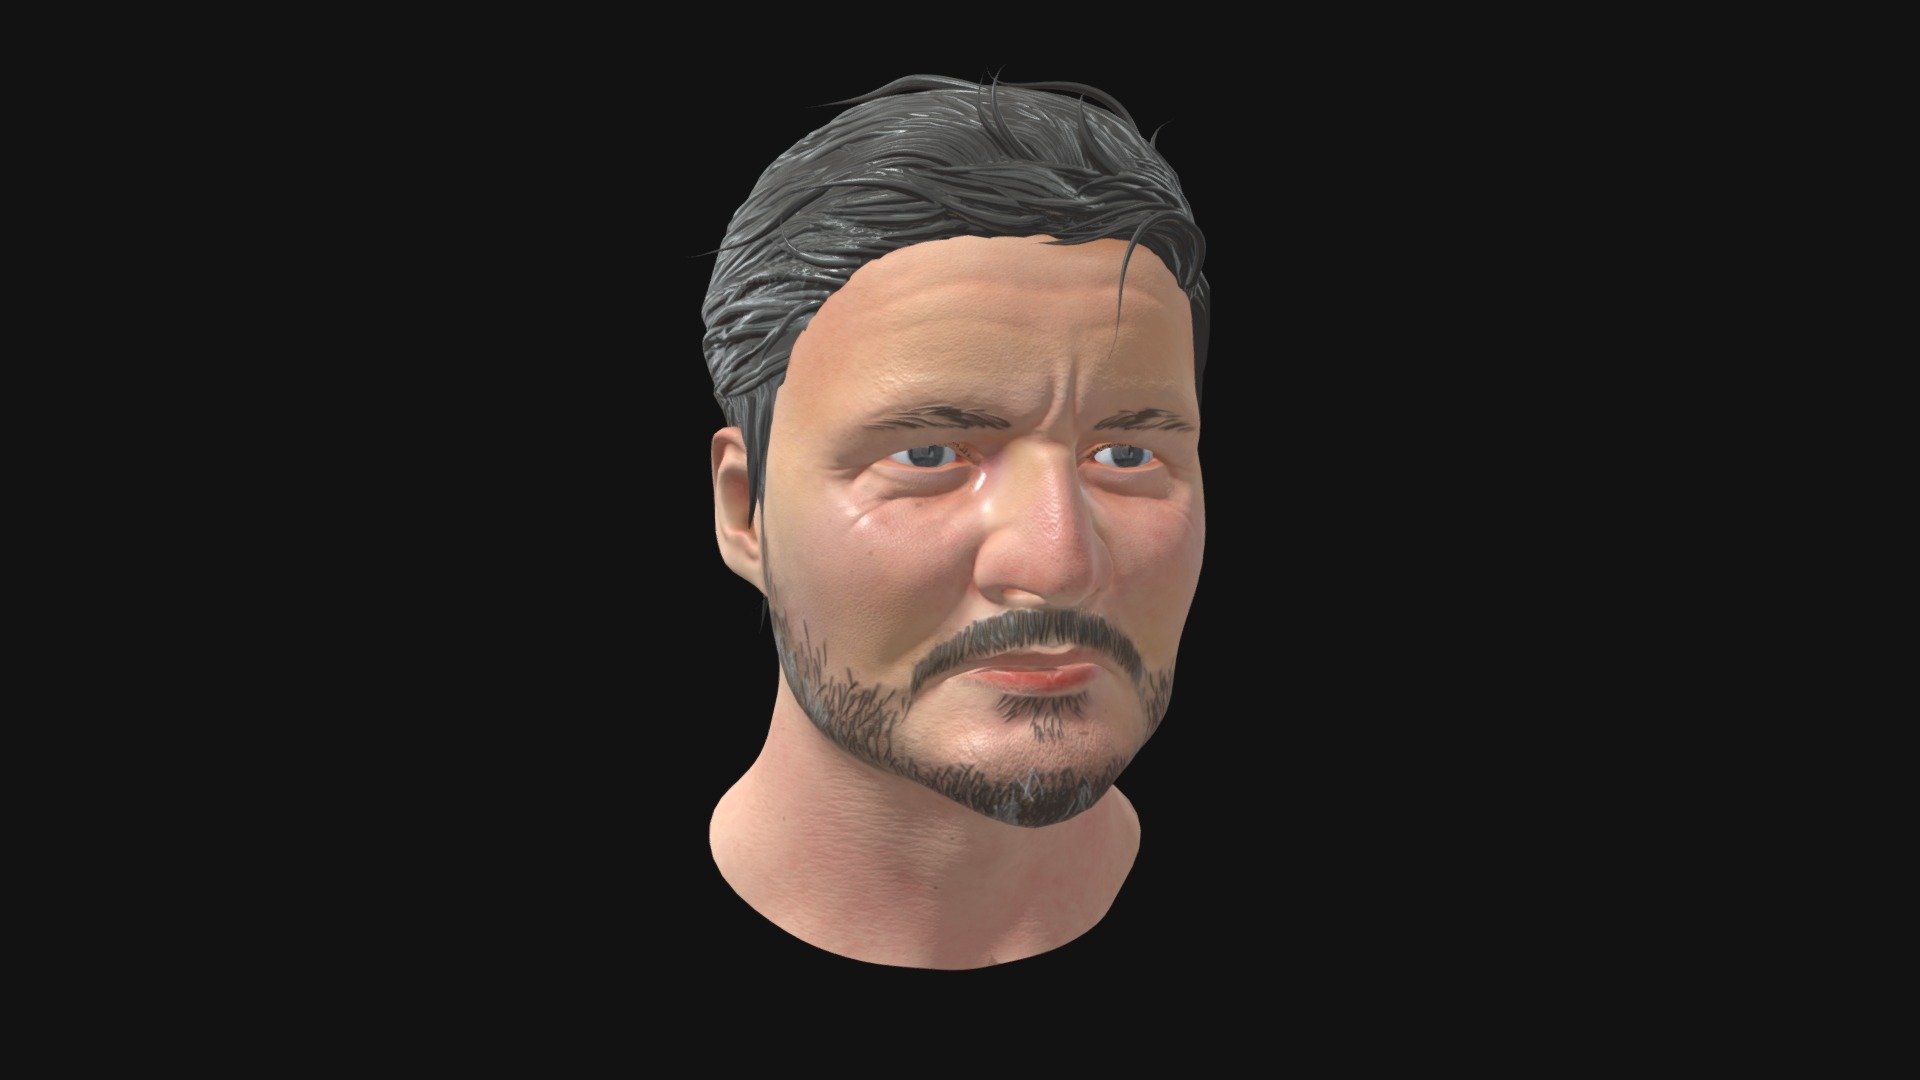 For the course Character Creation I made this sculpt of Pedro Pascal. We were asked to create a game-ready model out of our high poly sculpt and this is the final result. Sculpt was done in ZBrush and texturing was done in Substance Painter 3d model